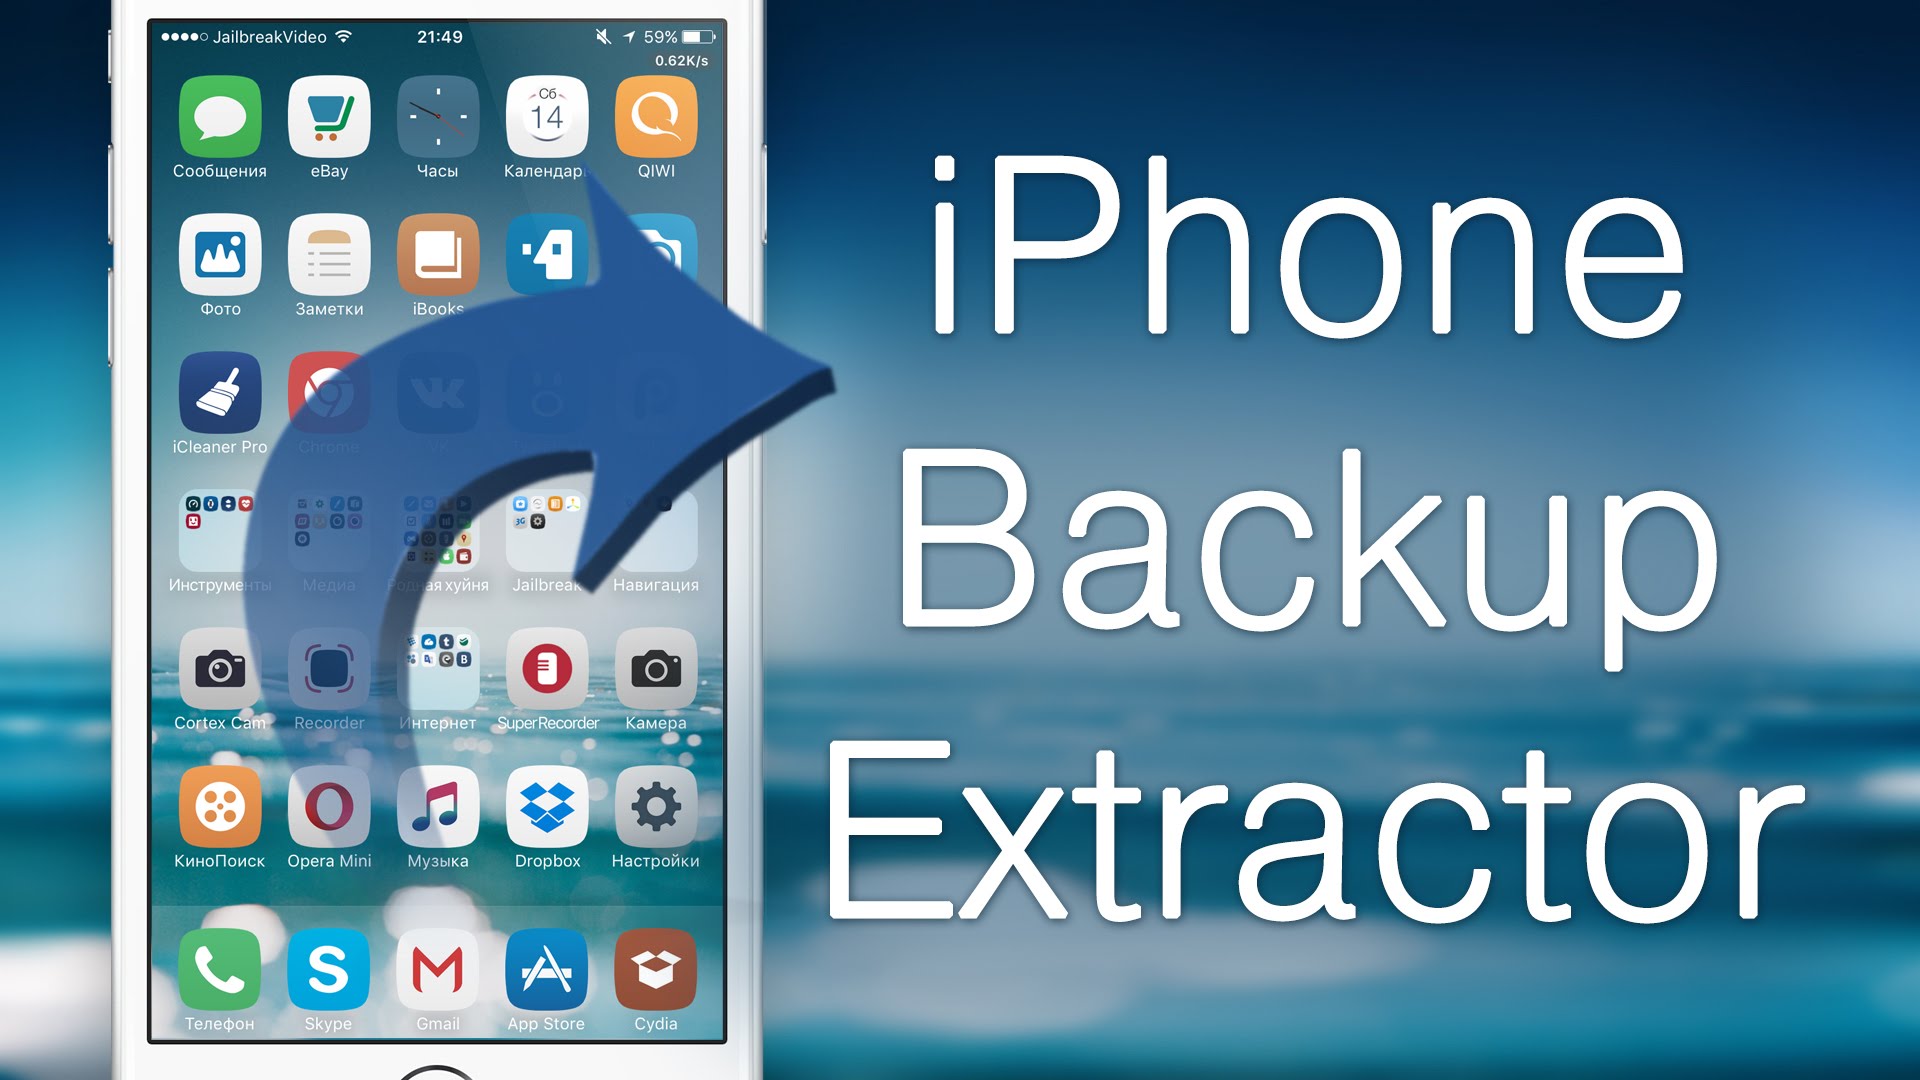 coolmuster iphone backup extractor